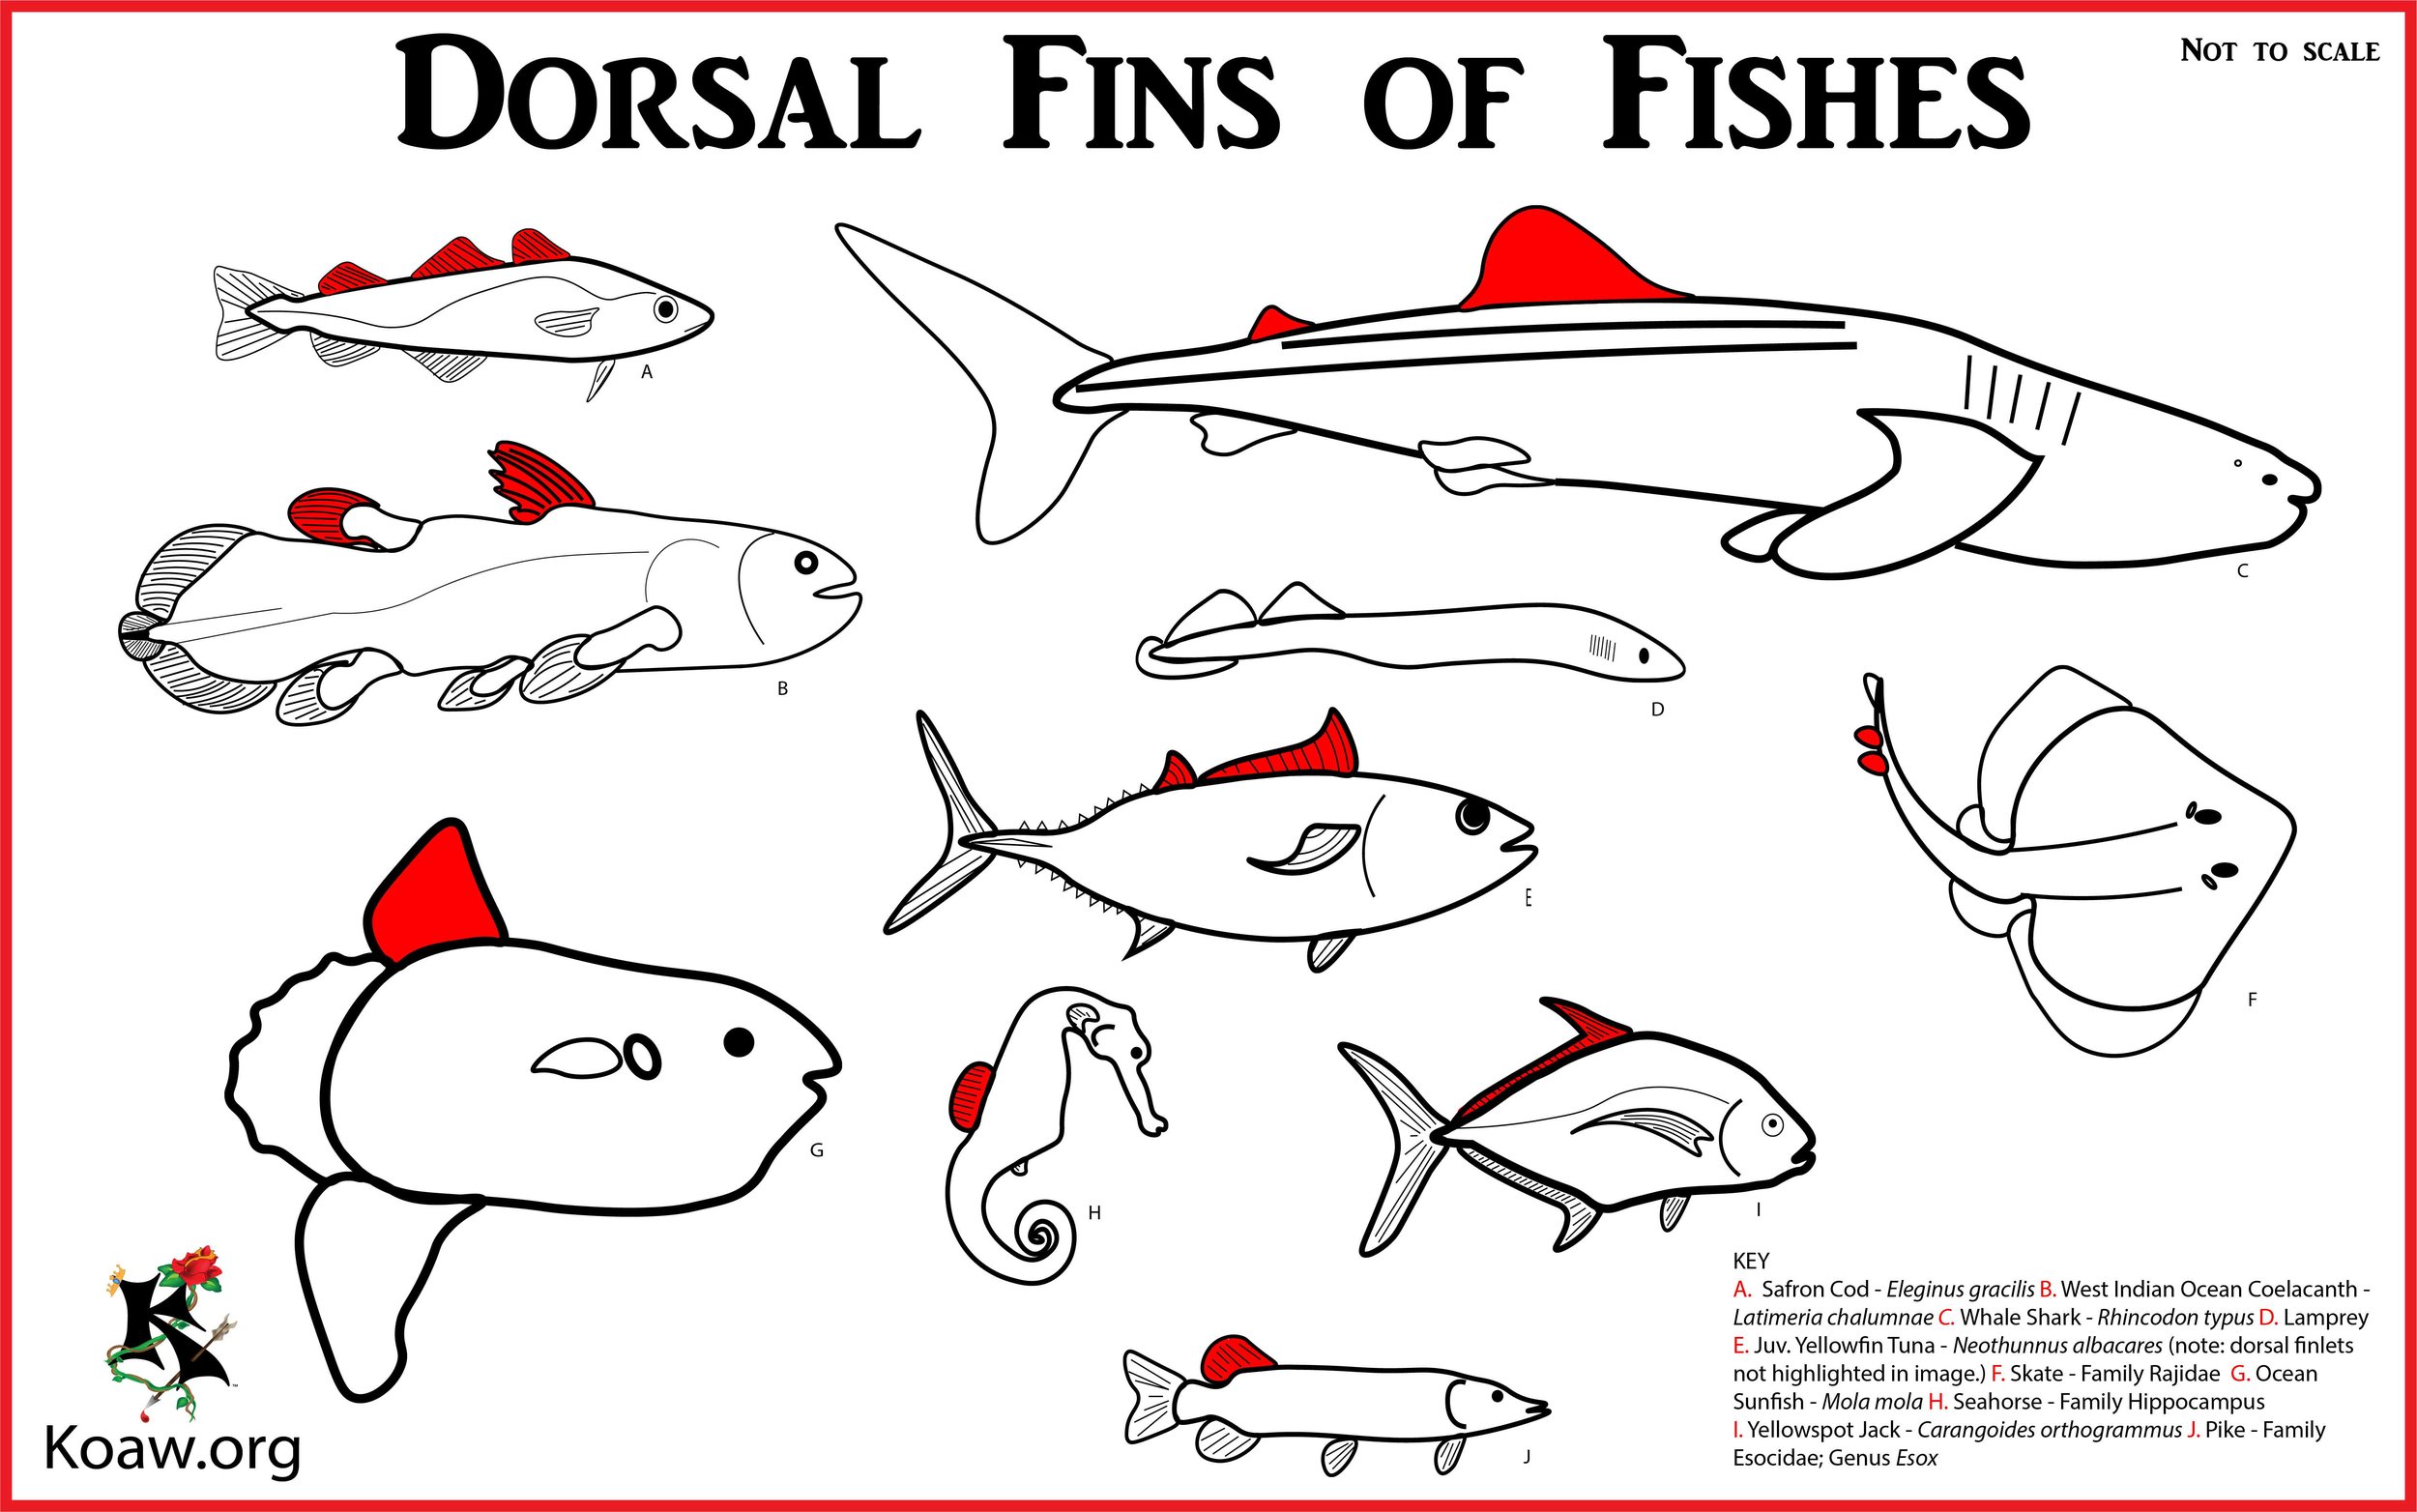 Dorsal Fins o Fishes - Illustration by Koaw